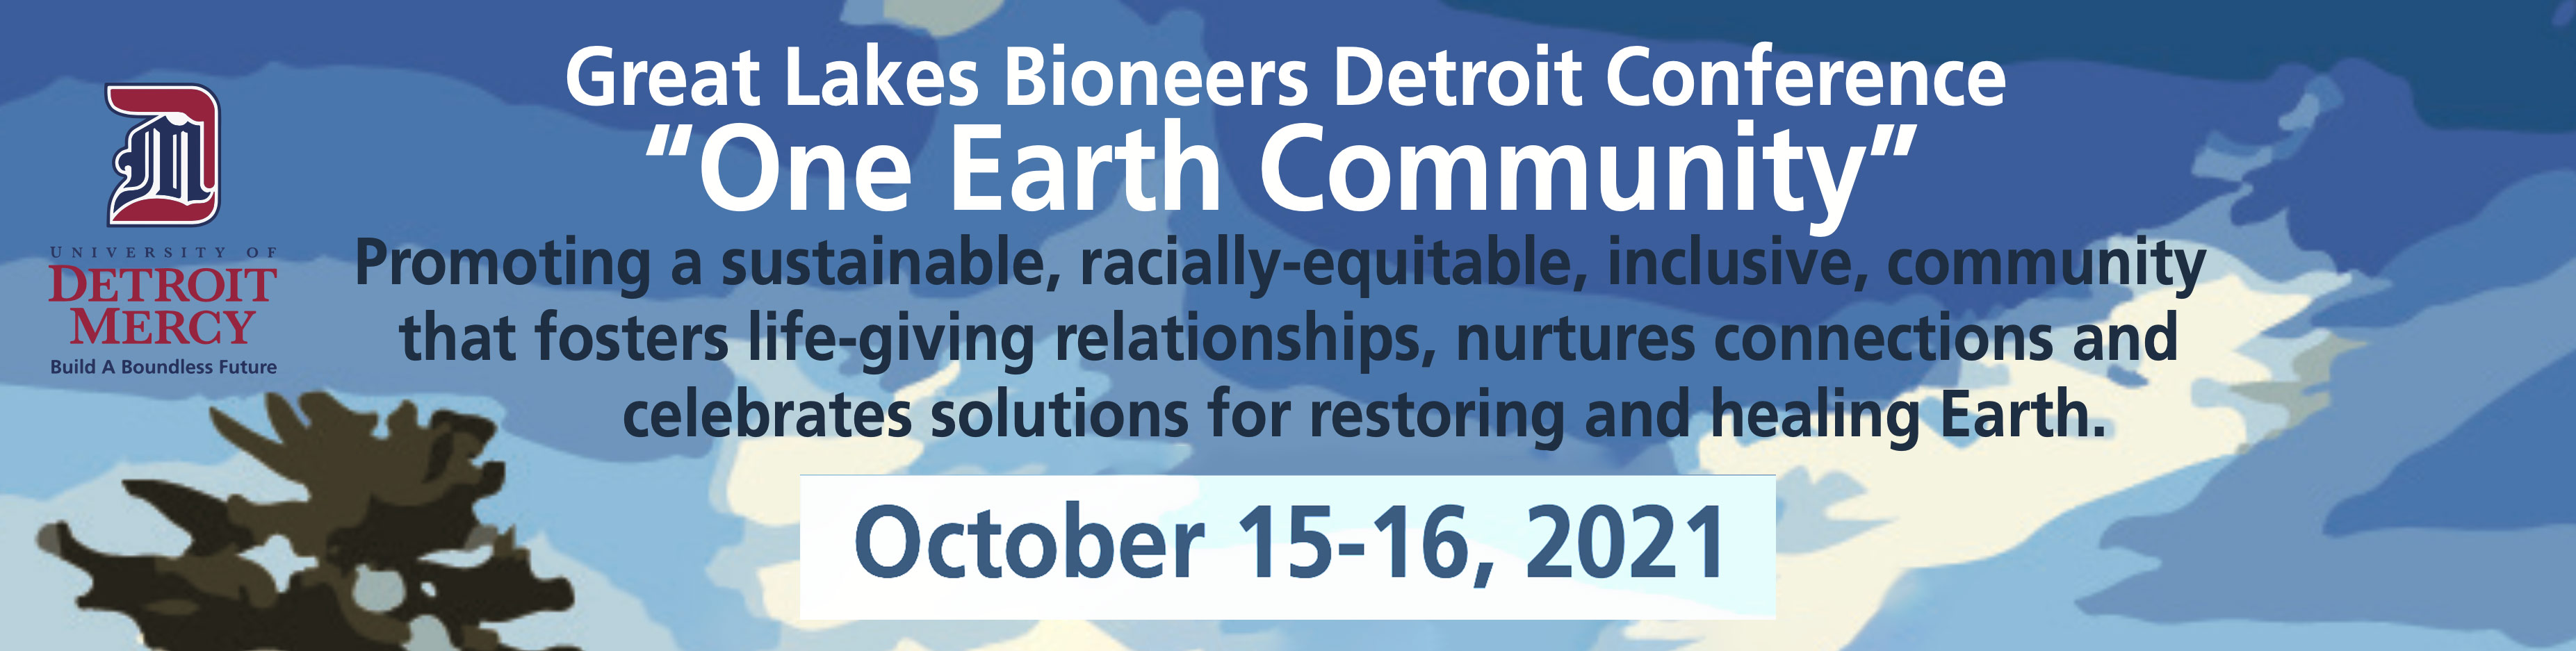 Great Lakes Bioneers Detroit Conference "One Earth Community" DETROIT Promoting a sustainable, racially-equitable, inclusive, community MERCY Build A Boundless Future that fosters life-giving relationships, nurtures connections and celebrates solutions for restoring and healing Earth. October 15-16, 2021